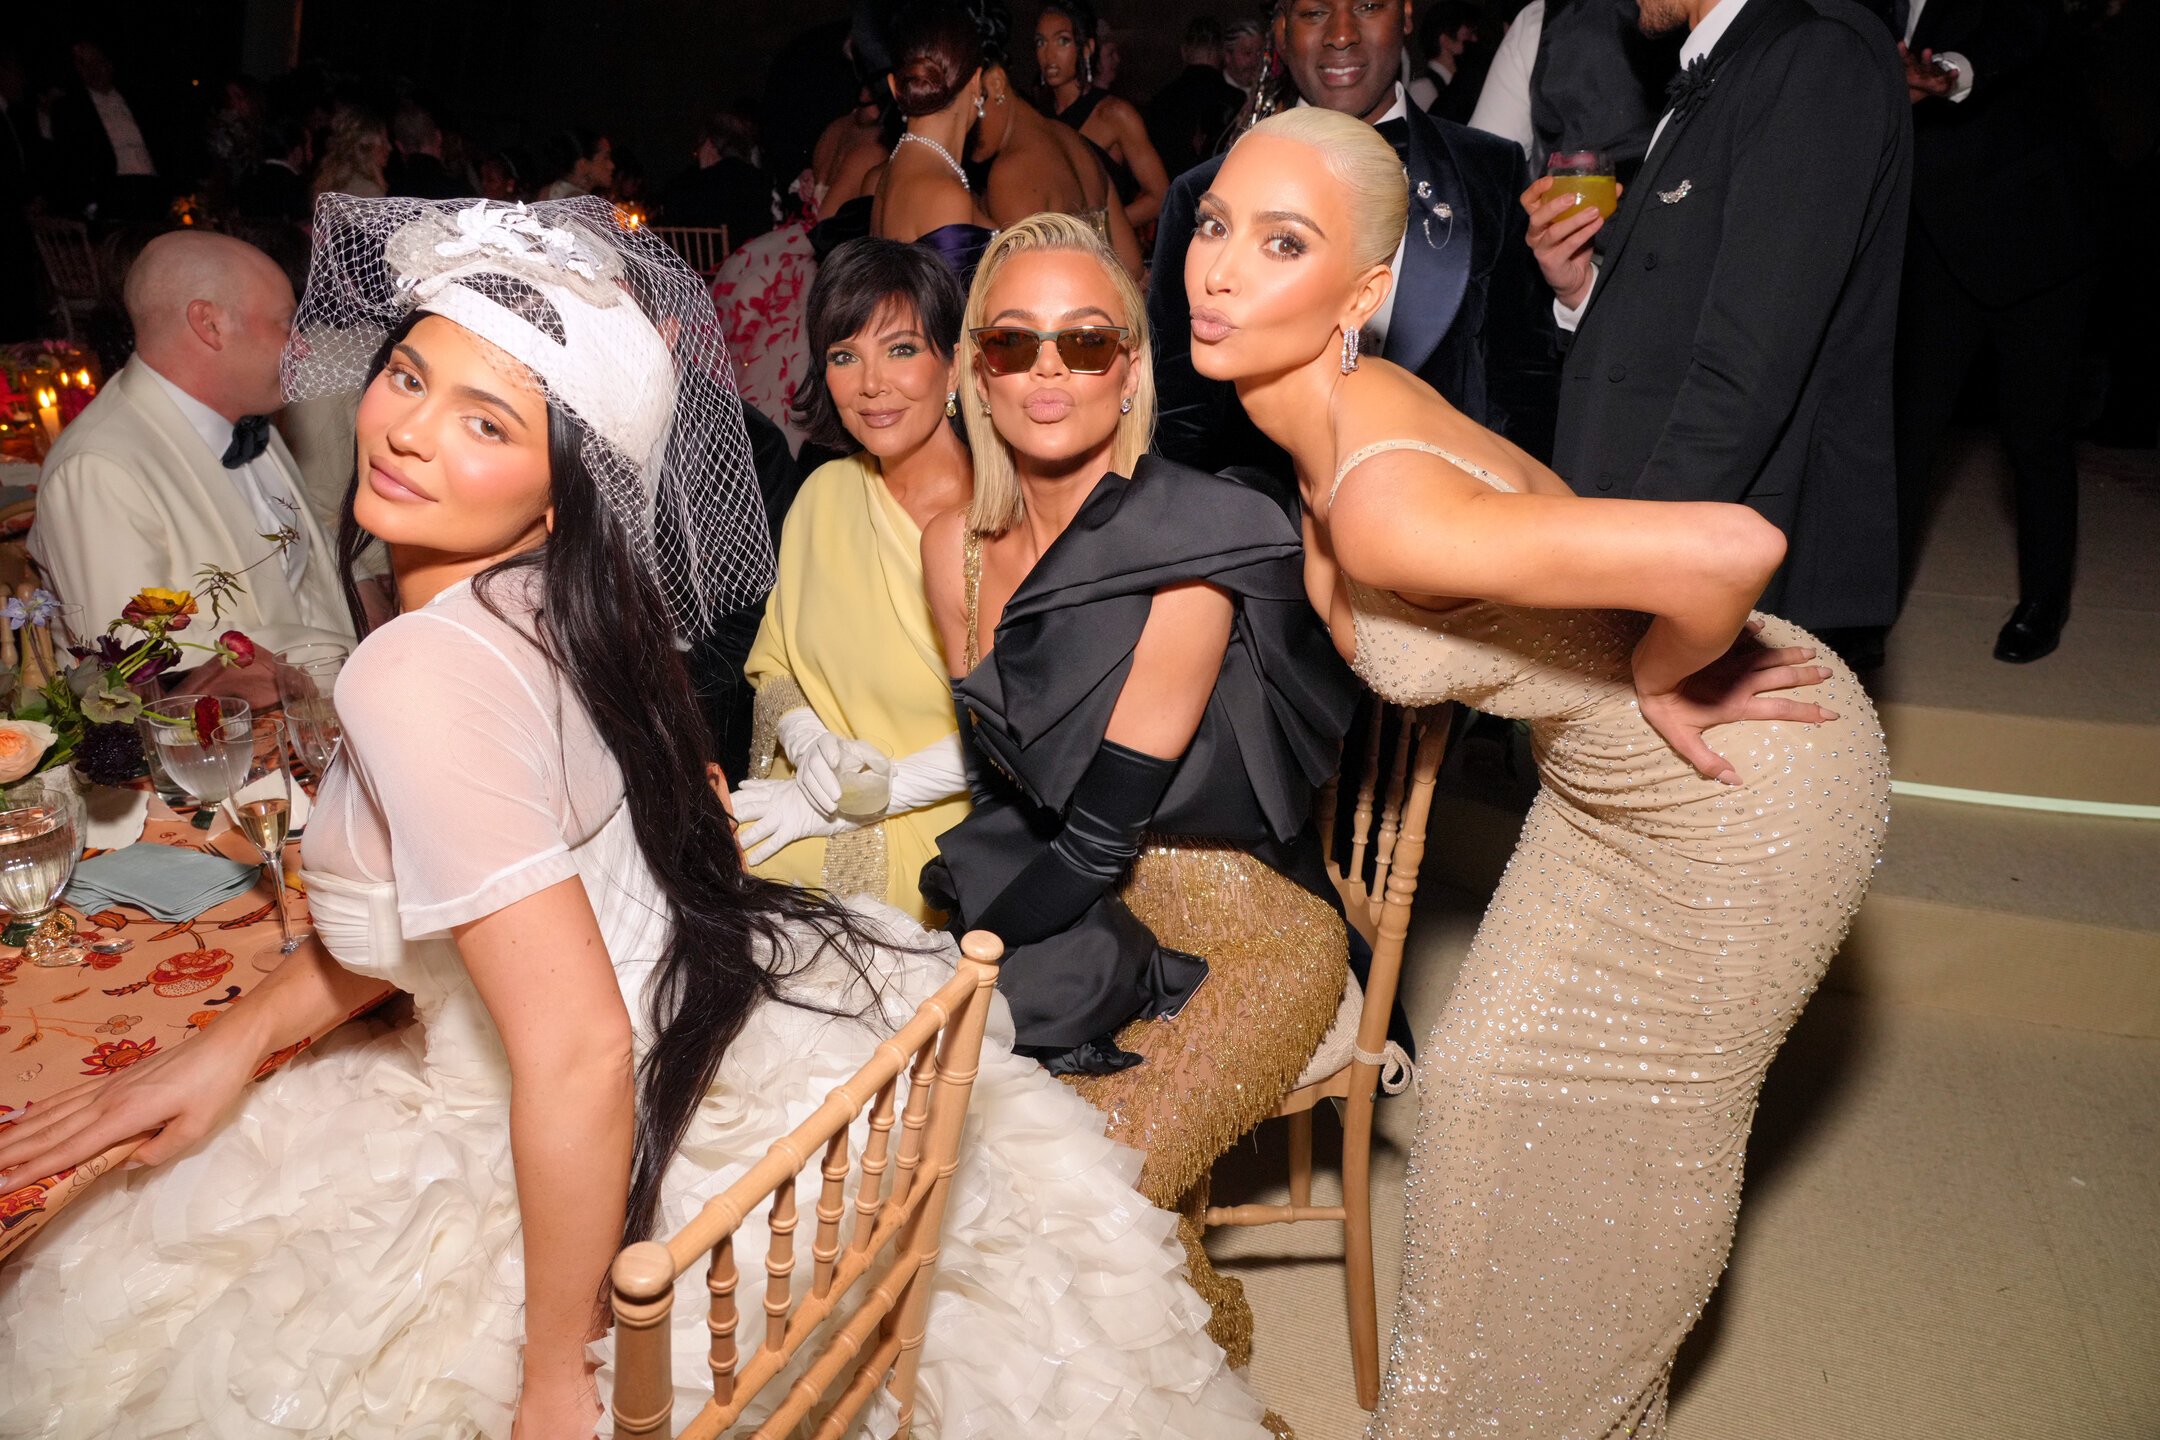 Why Khloé Kardashian Didn’t Want to Go to the 2022 Met Gala and How Kim Convinced Her